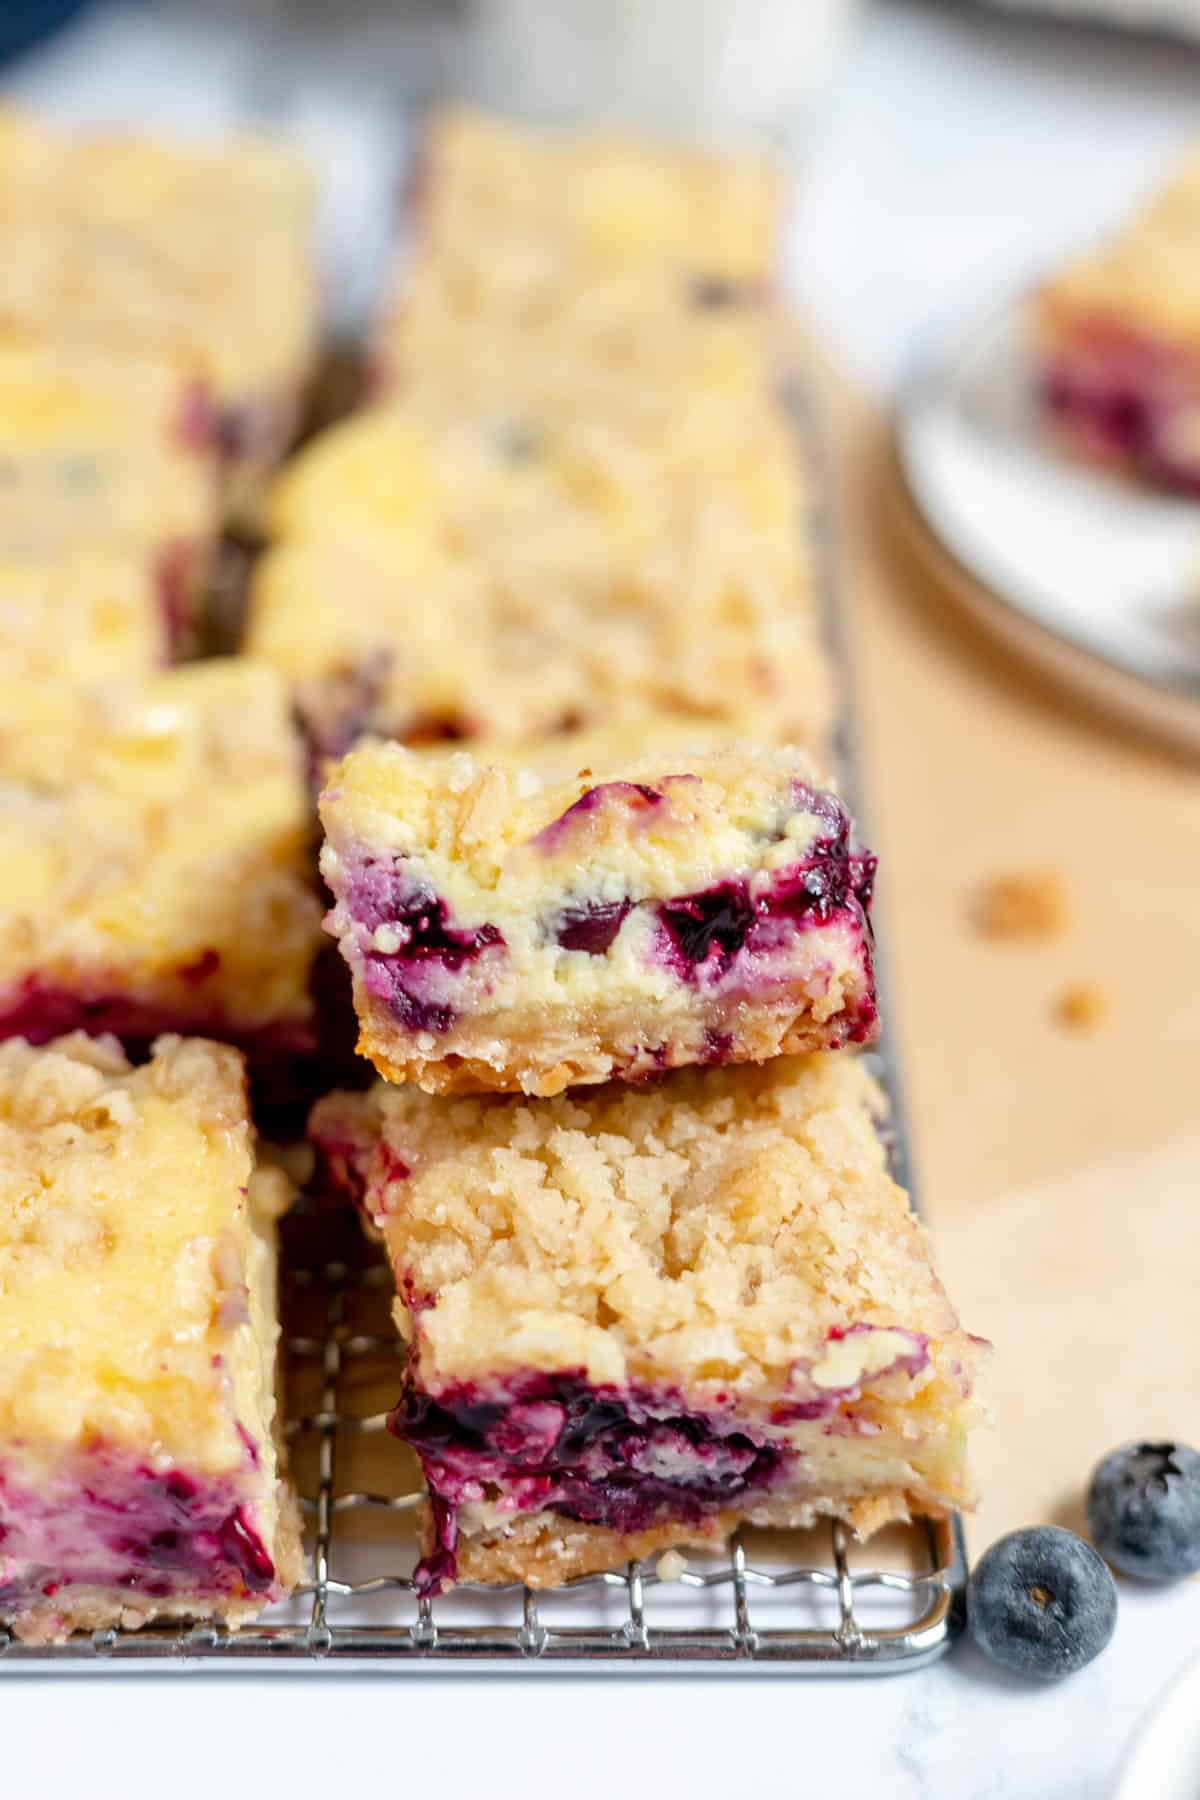 Blueberry cheesecake bars that have been cut into squares.